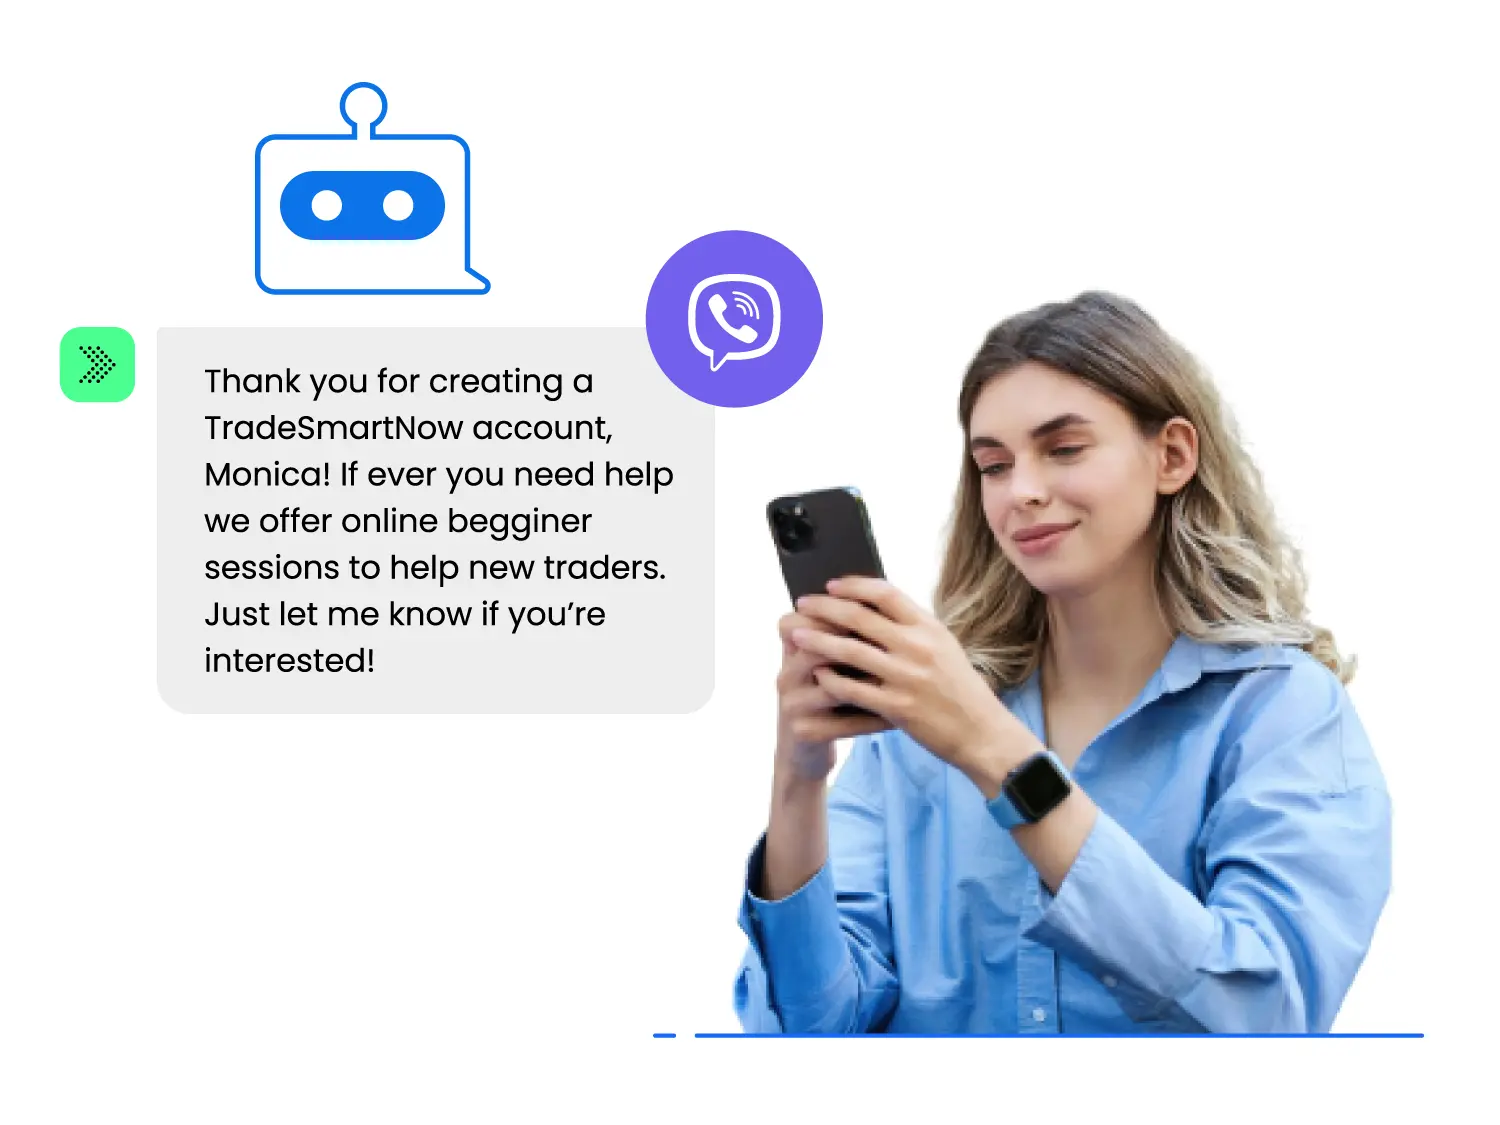 An automated message delivered by a Viber chatbot, triggerred by a user's action